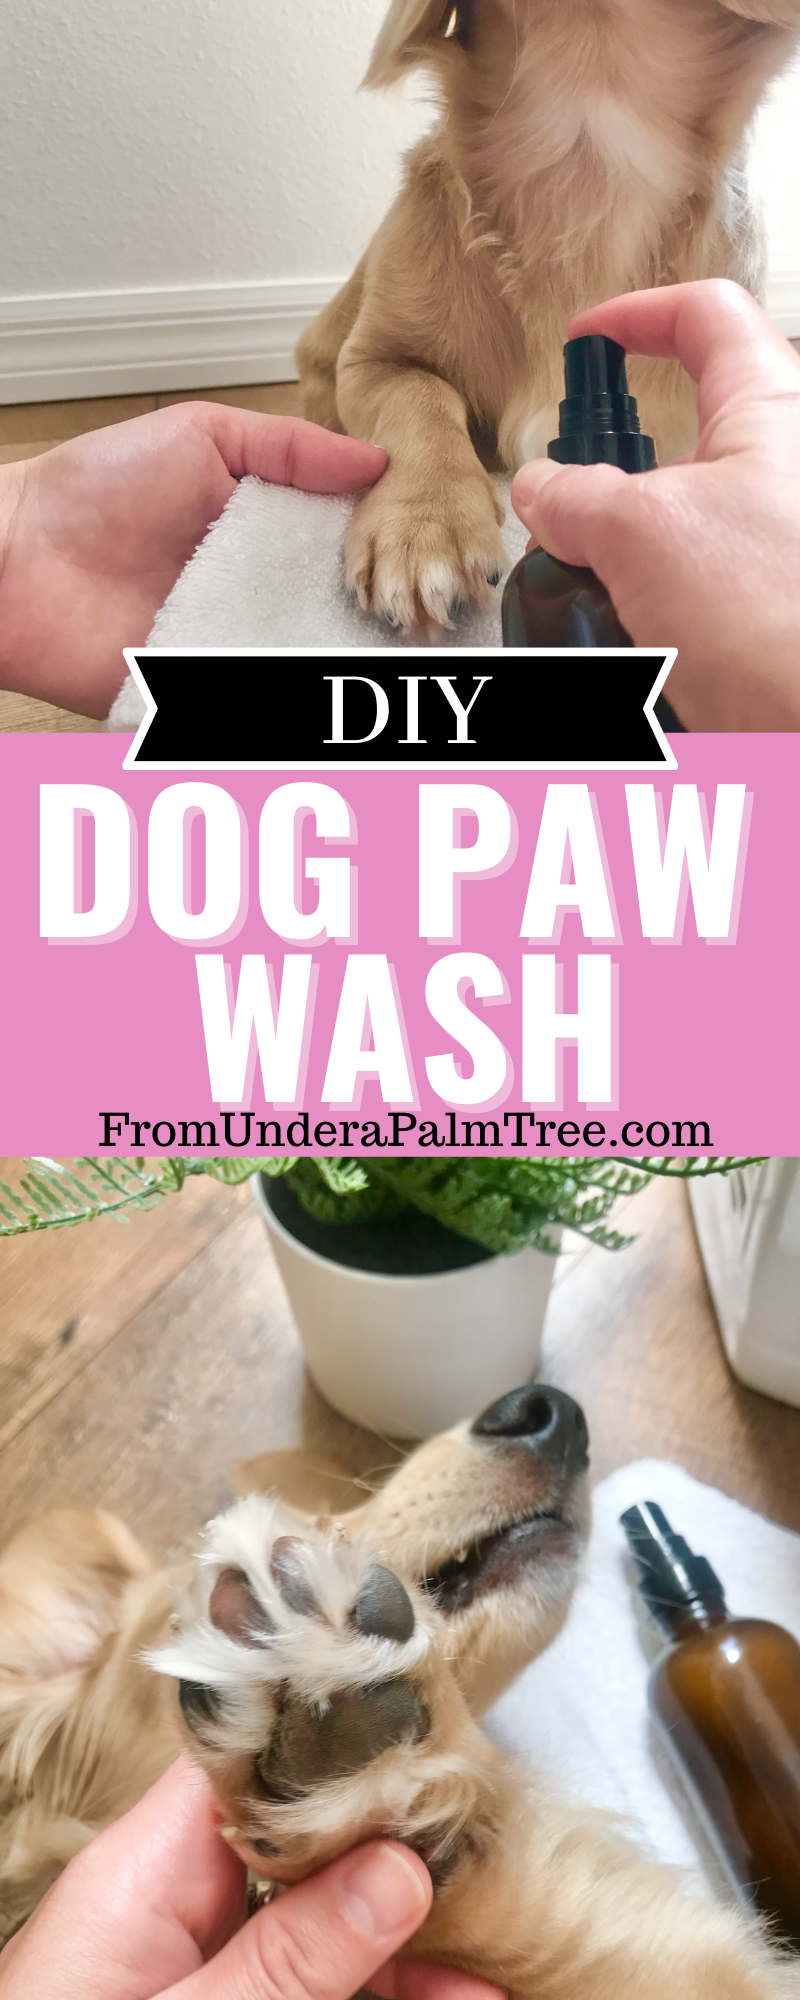 dog paw wash | diy dog paw wash | how to wash my dogs paws | paw wash recipe | how to make paw wash | what can I wash my dogs paws with | dog paw cleanser | diy paw cleanser | how to make a paw cleanser for my dog | what can i clean my dogs feet with | how to clean my dogs feet | dr bronners soap uses | can i uses dr bronners soap on my pet | diy dog paw cleanser |